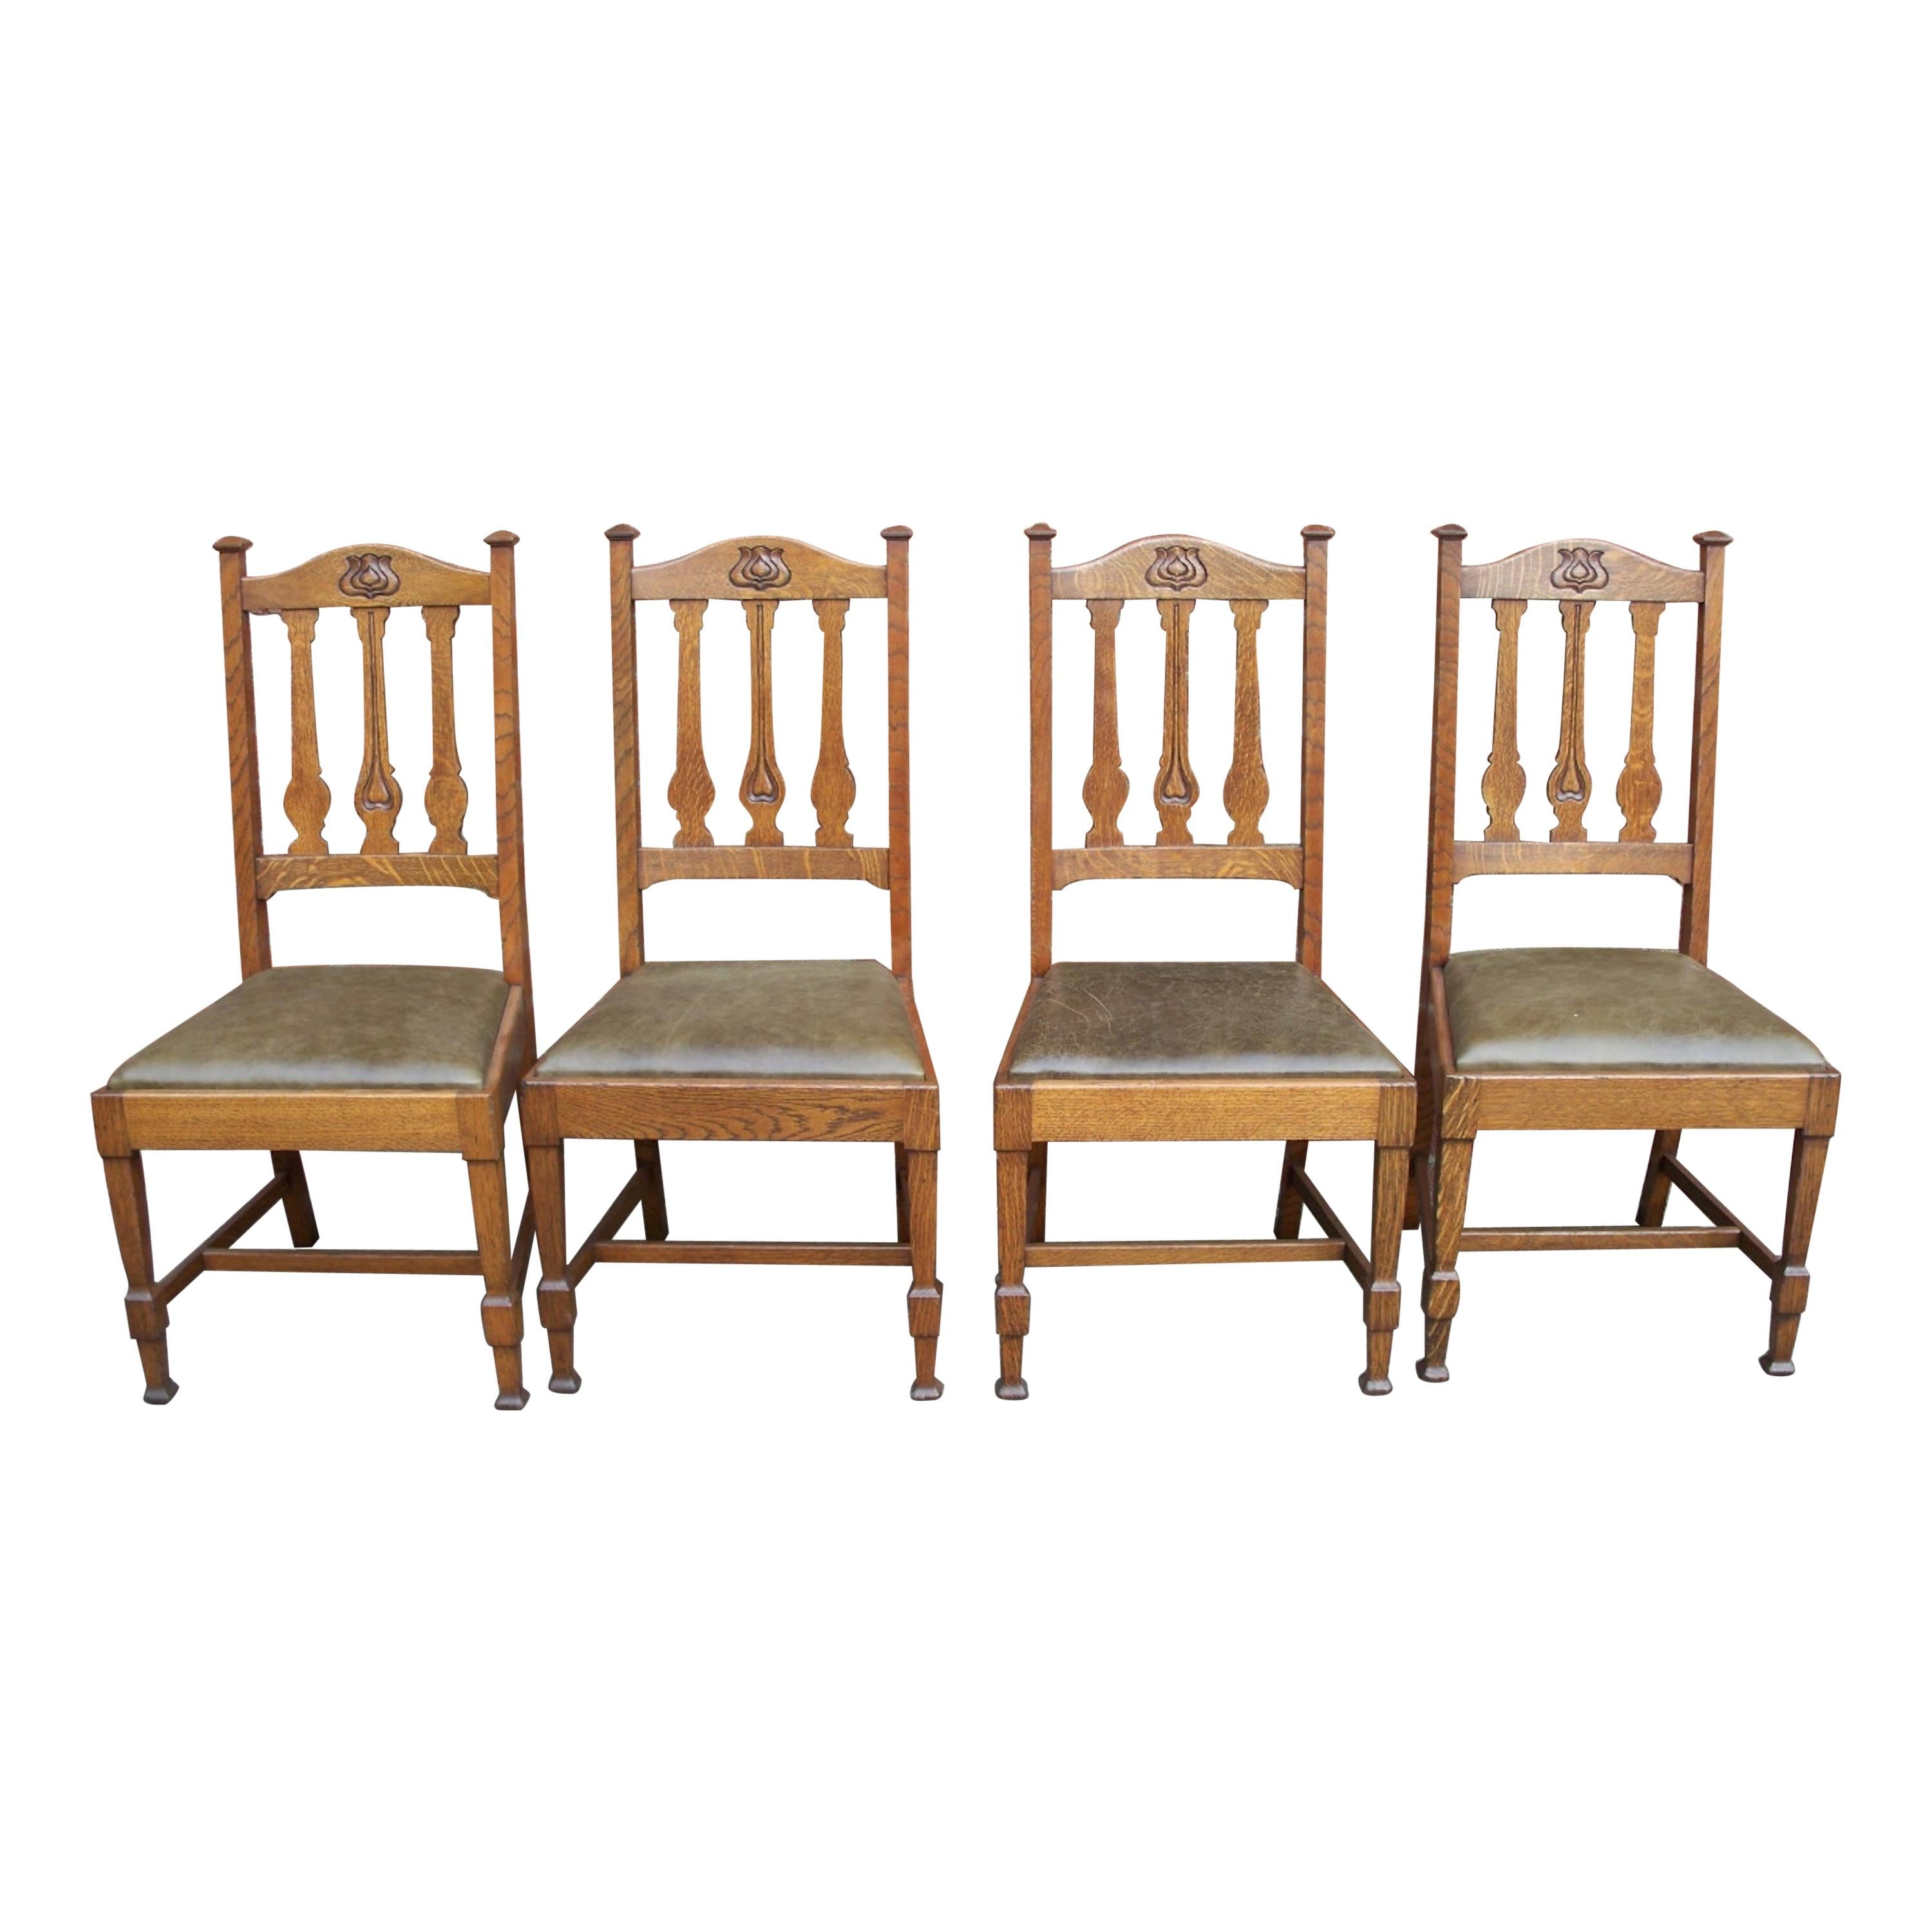 Shapland & Petter, Four Arts & Crafts Oak Dining Chairs with Floral Details